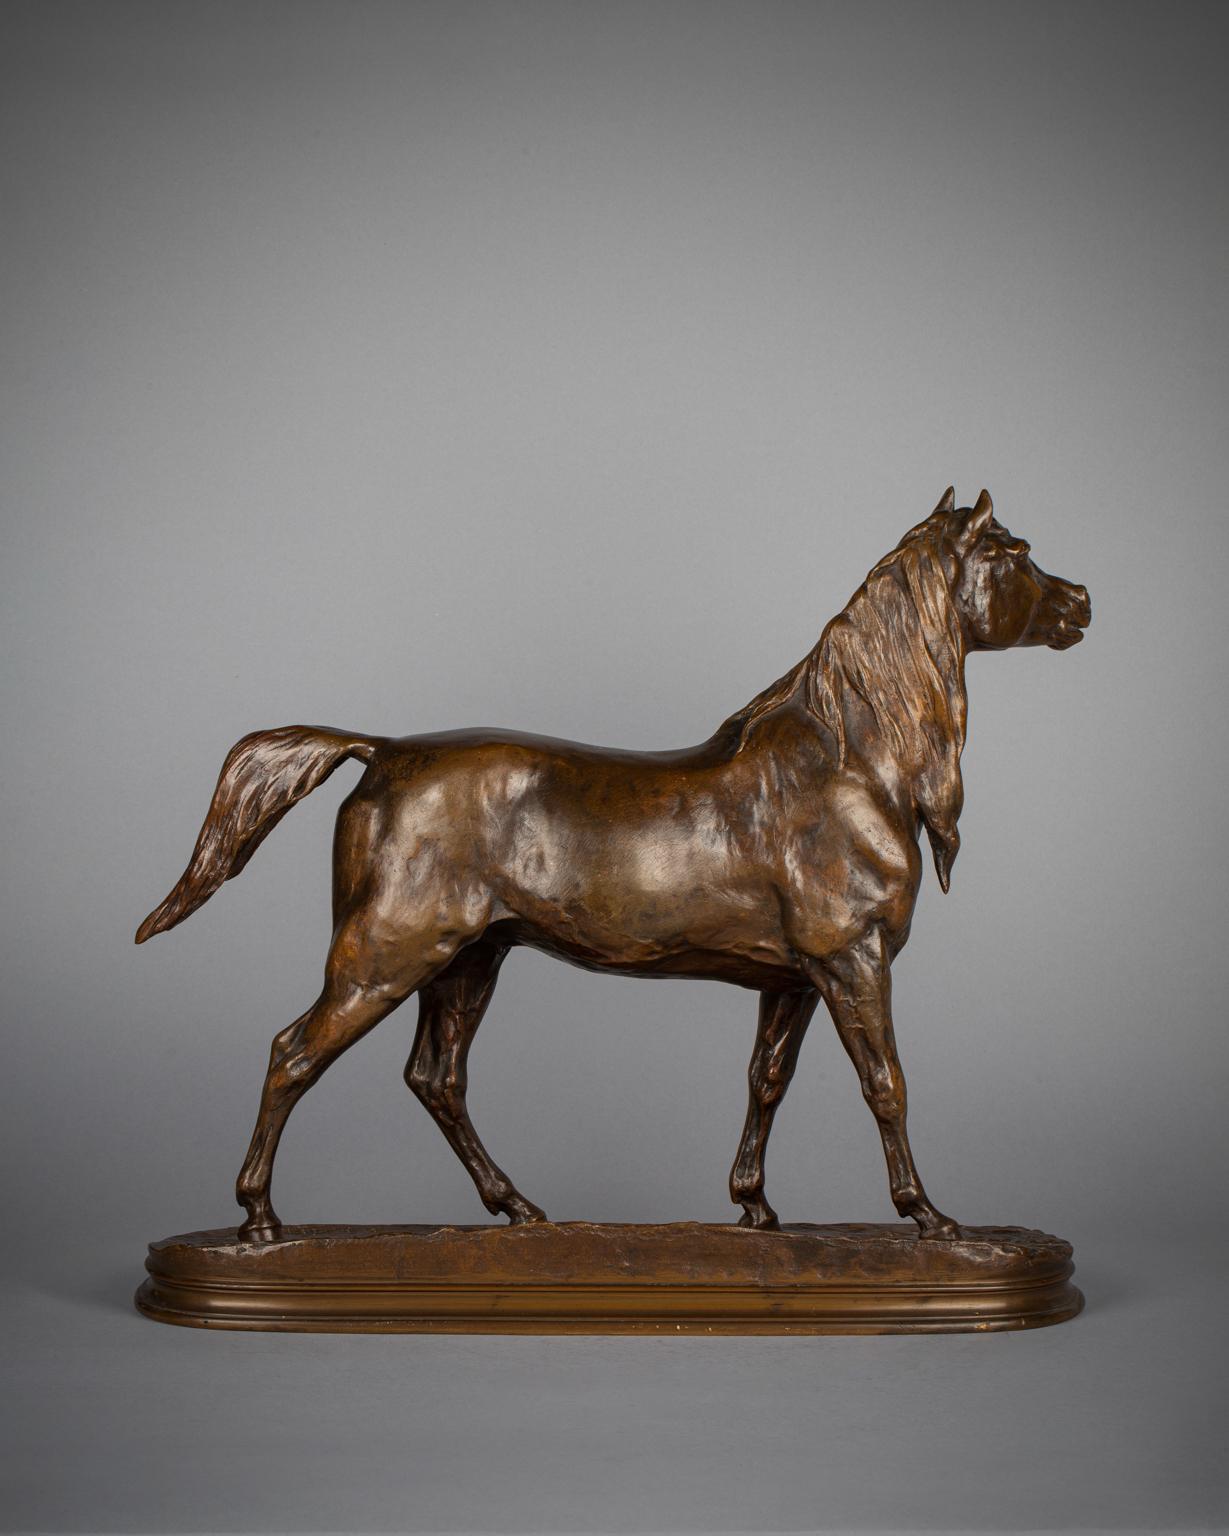 This highly detailed study of a Normandy mare is an excerpted model from Mêne's popular Jument normande et son poulain, exhibited in wax at the 1868 Salon (no. 3749), and in bronze the following year (no. 3592).signed P. J. MÊNE, stamped F.